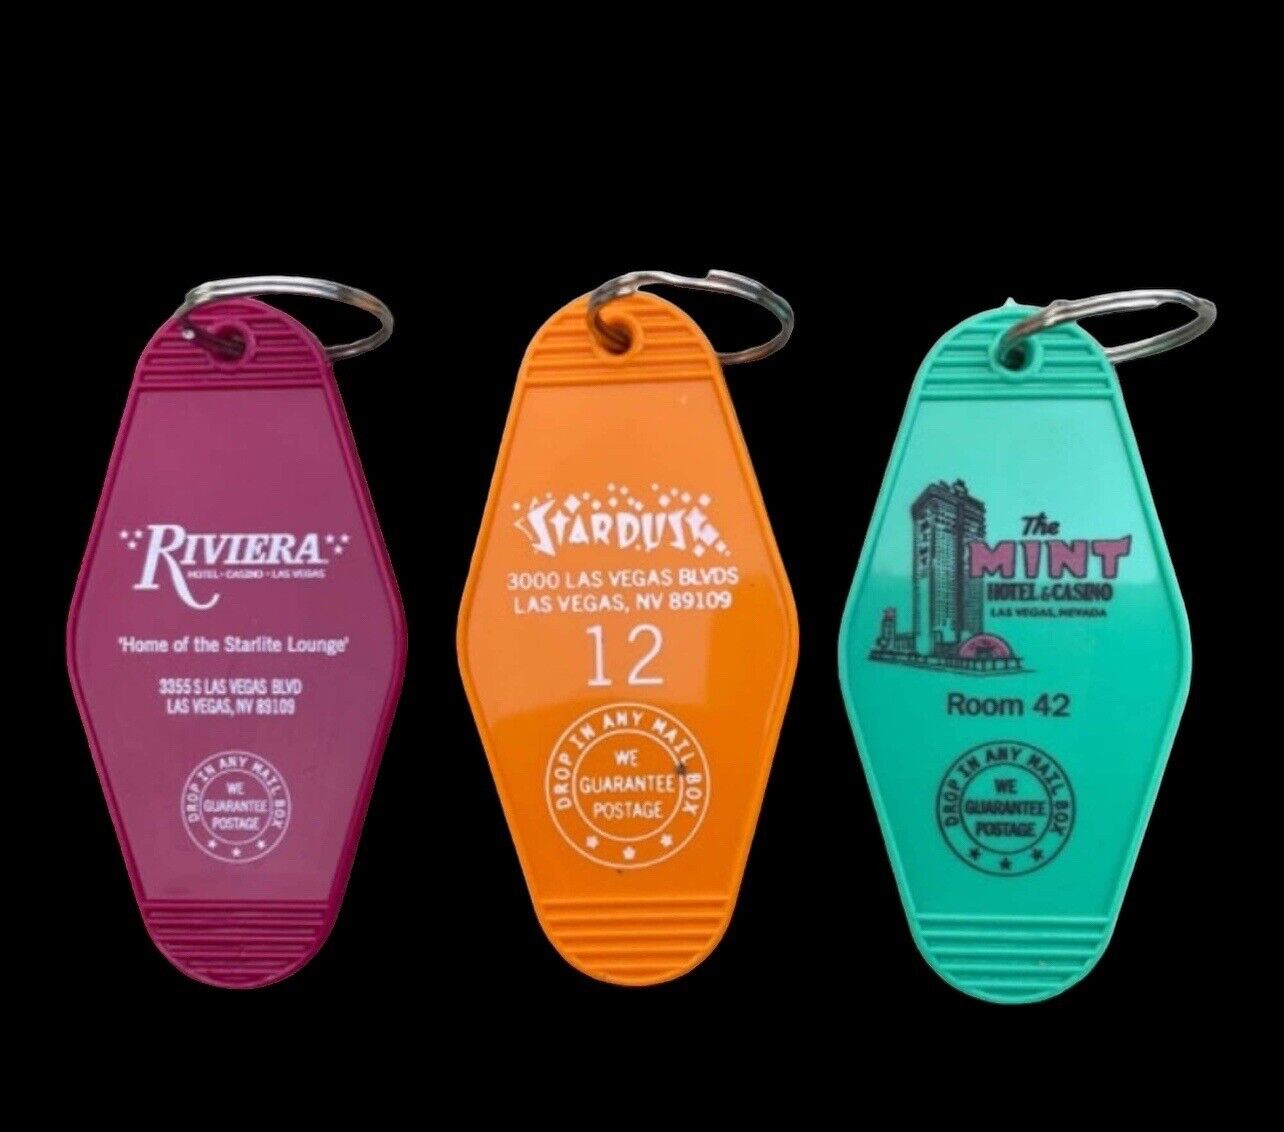 OLD LAS VEGAS #2 Replica Collection - Get 3 Keytags